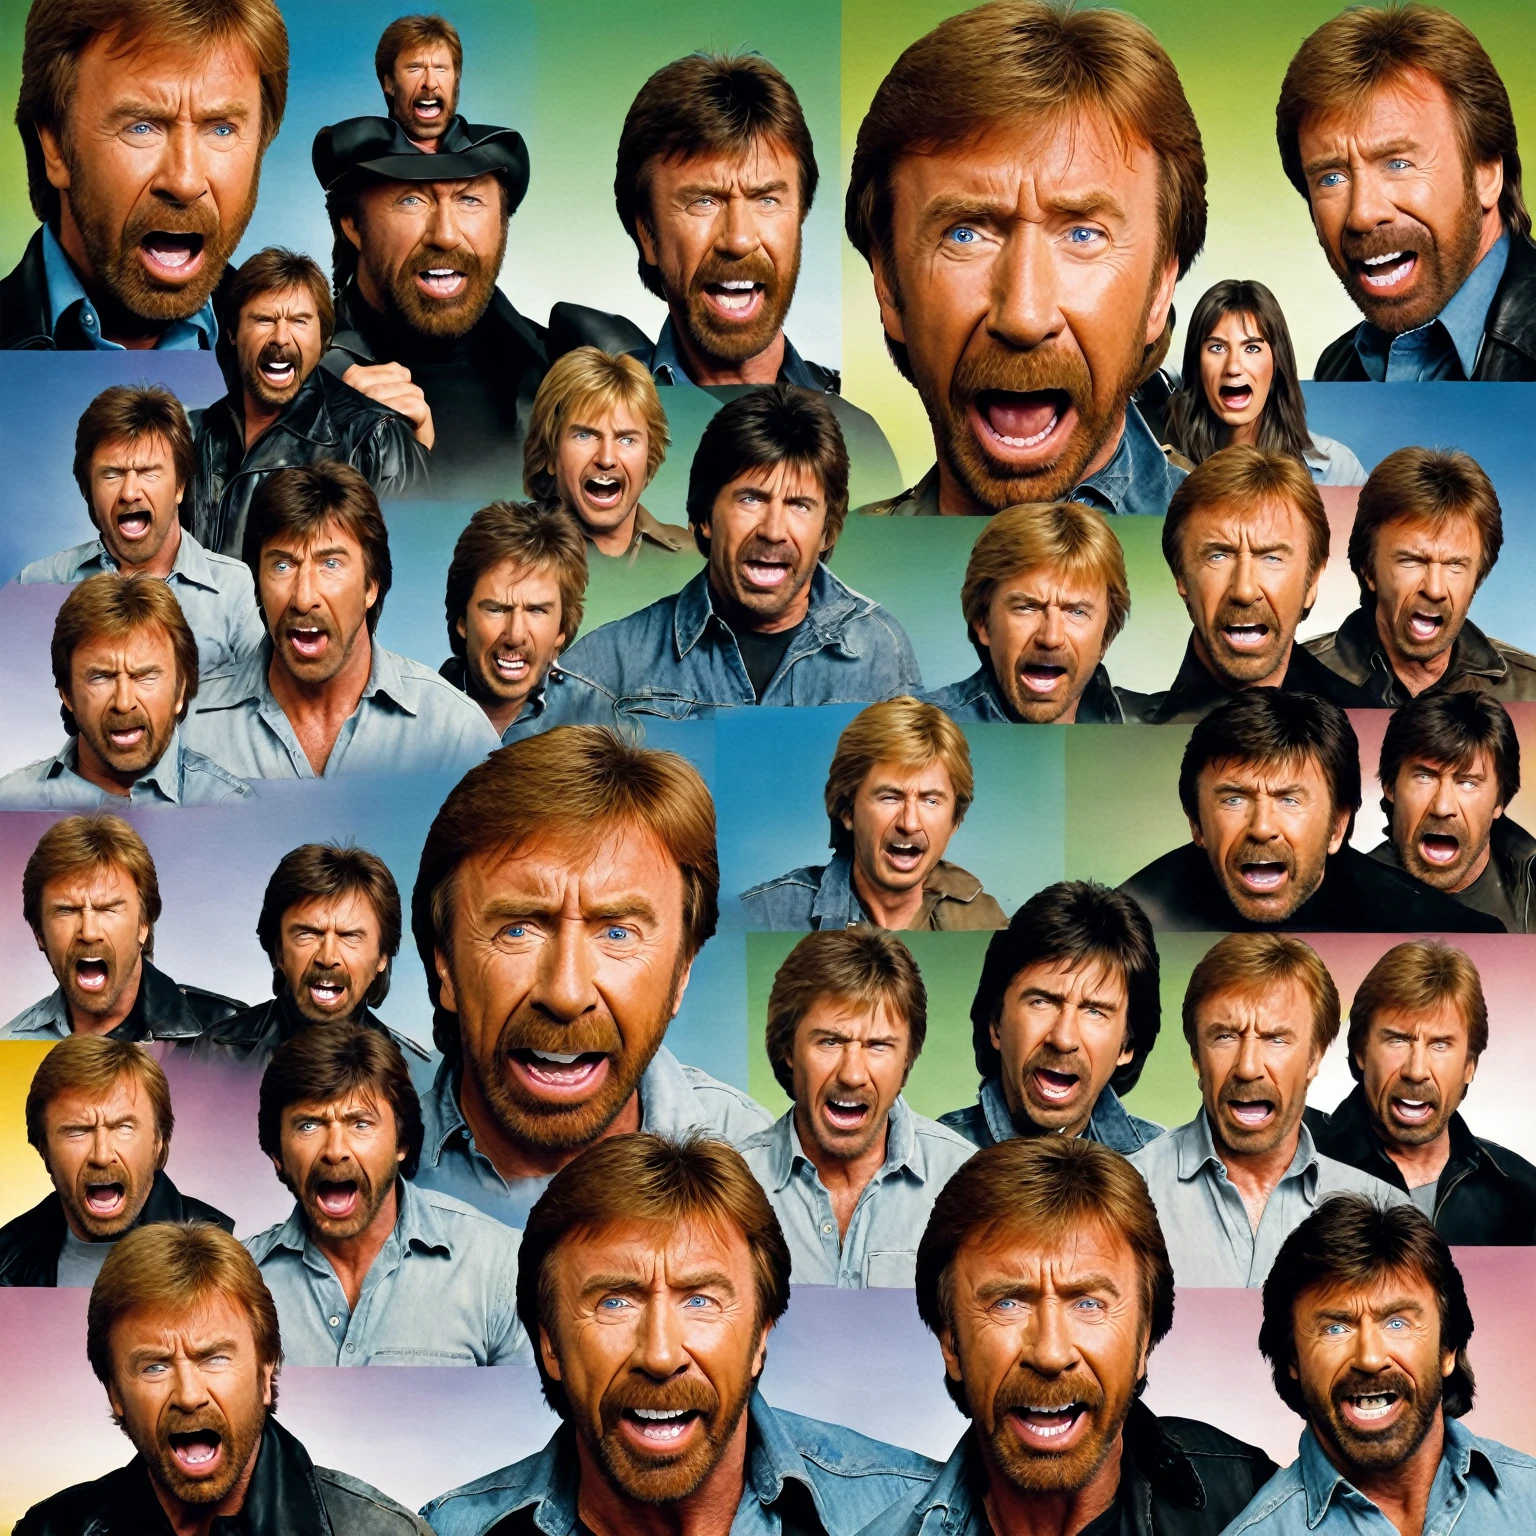 "The Emotions of Chuck Norris" meme
